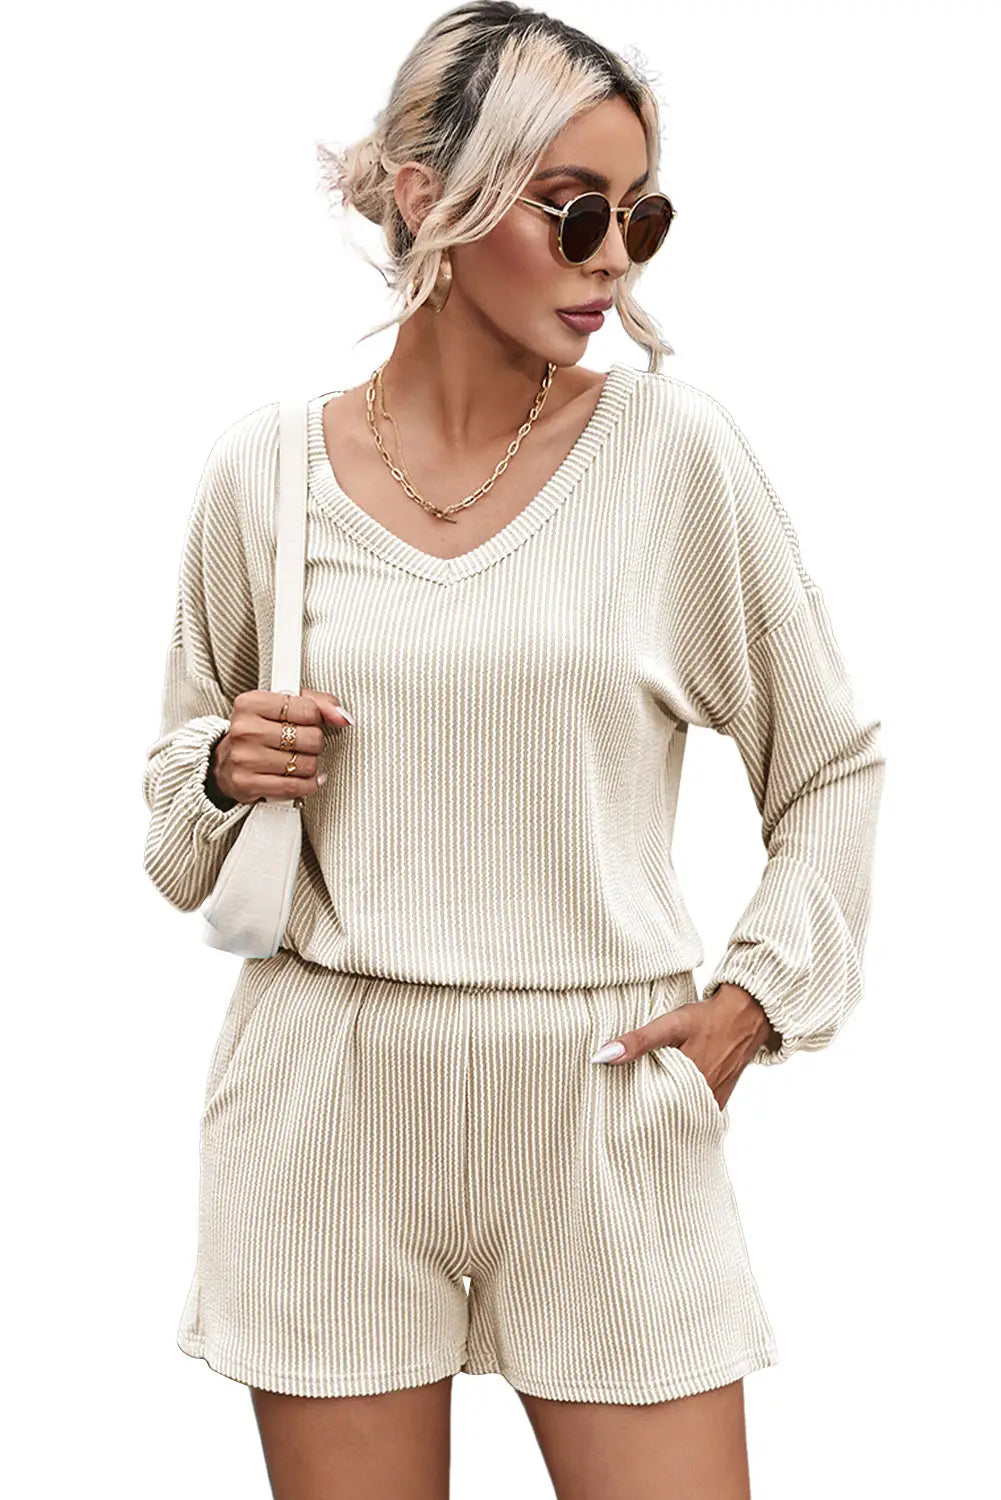 Beige corded v neck slouchy top pocketed shorts set - loungewear